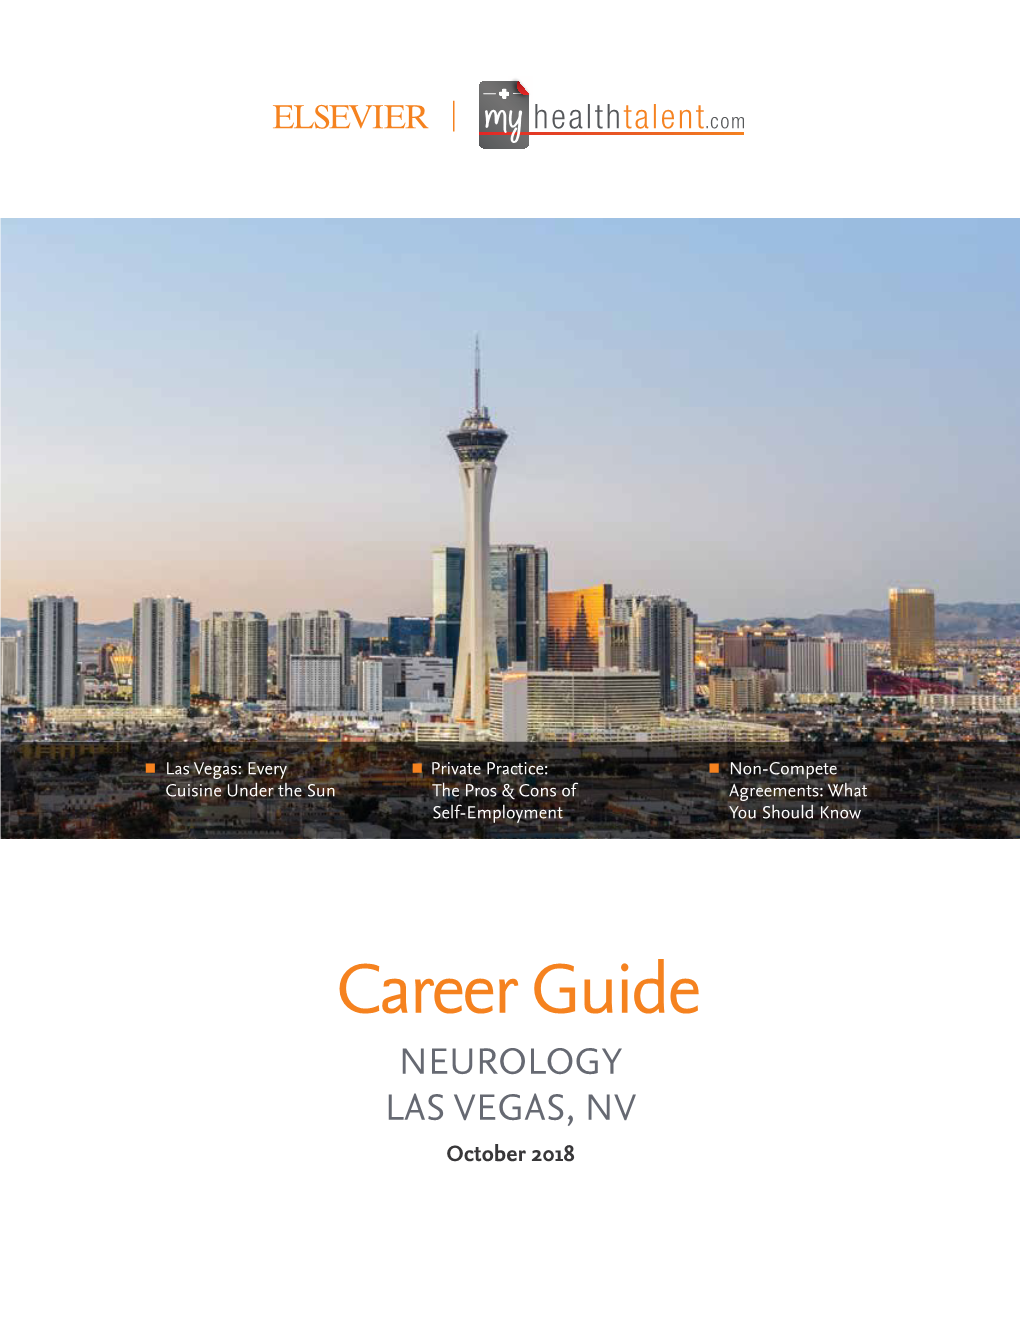 NEUROLOGY Career Guide Las Vegas Restaurants Have So Many Mouth- Watering Food Choices from Around the World to Whet Your Appetite